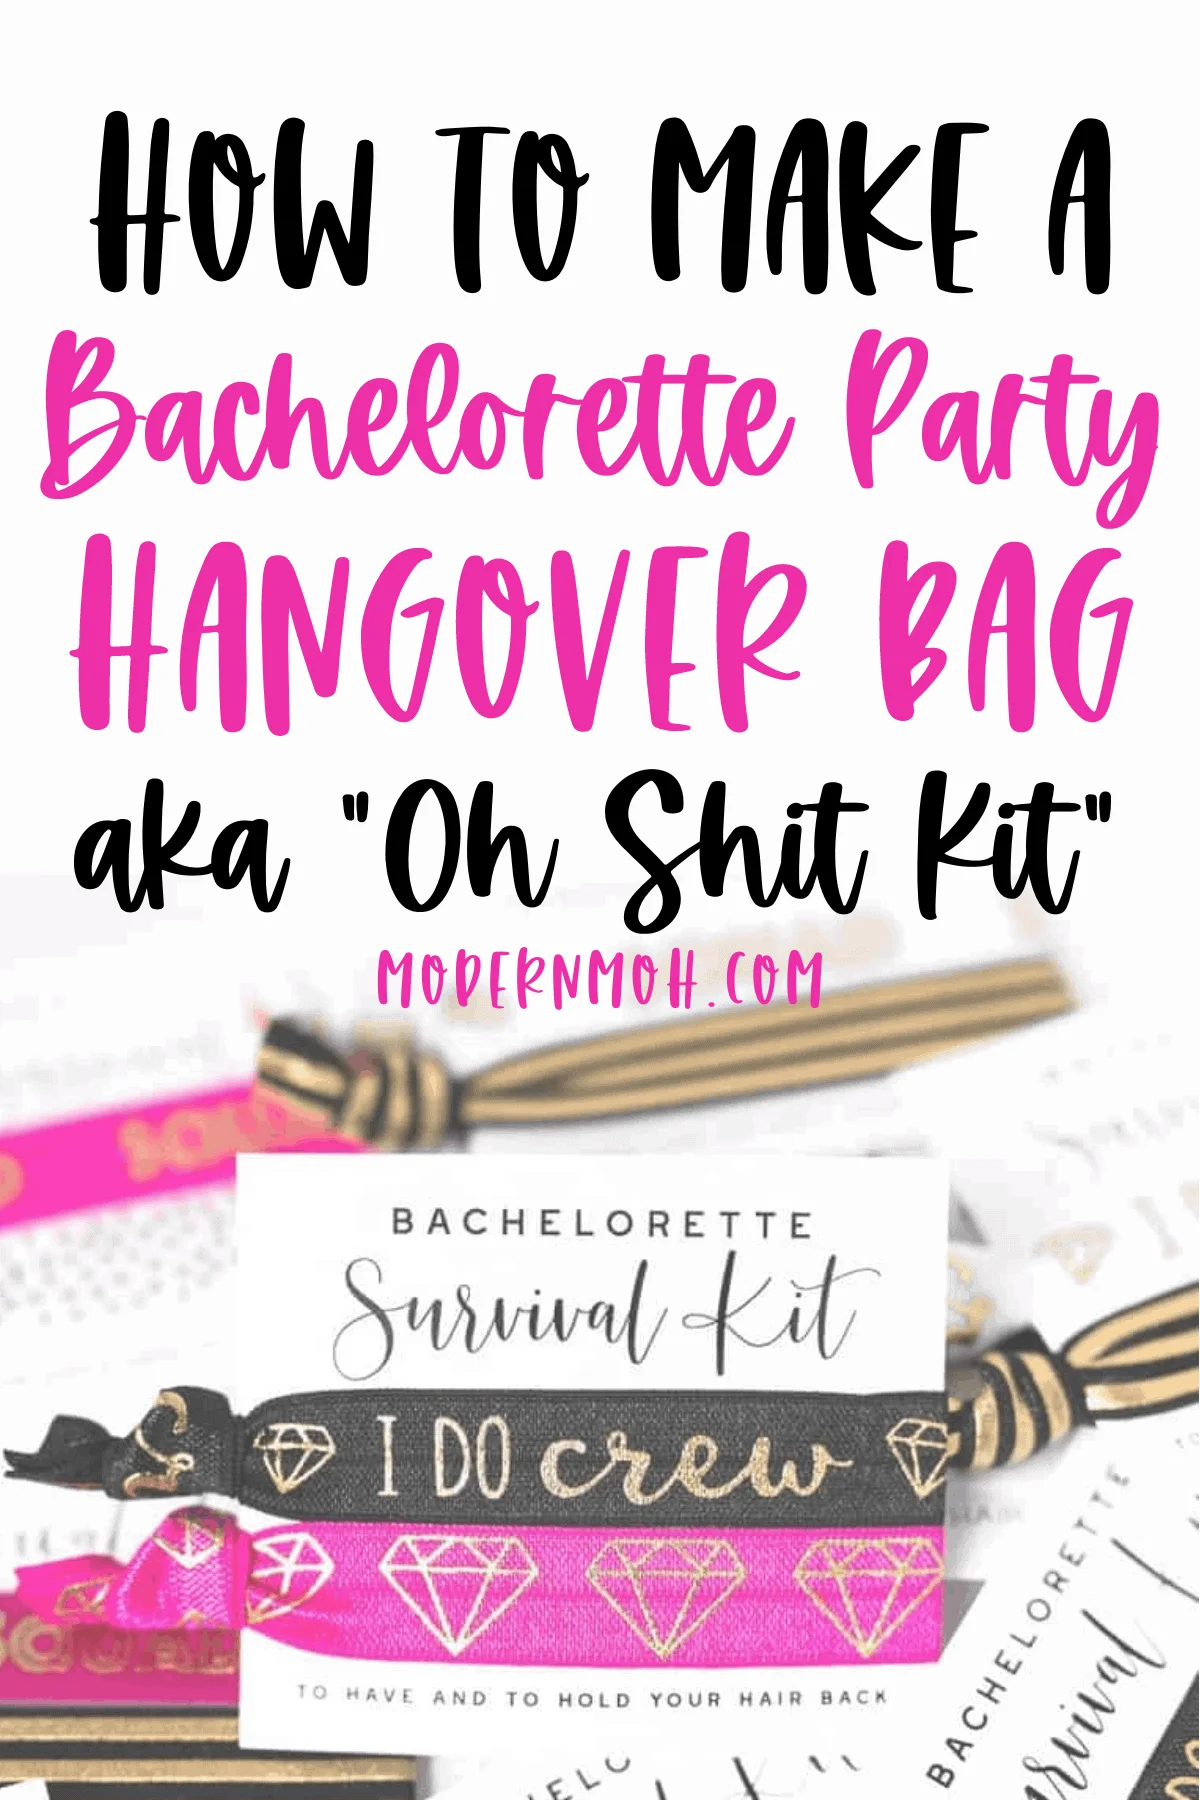 What to put in a Bachelorette Party hangover kit? 32 Ideas your